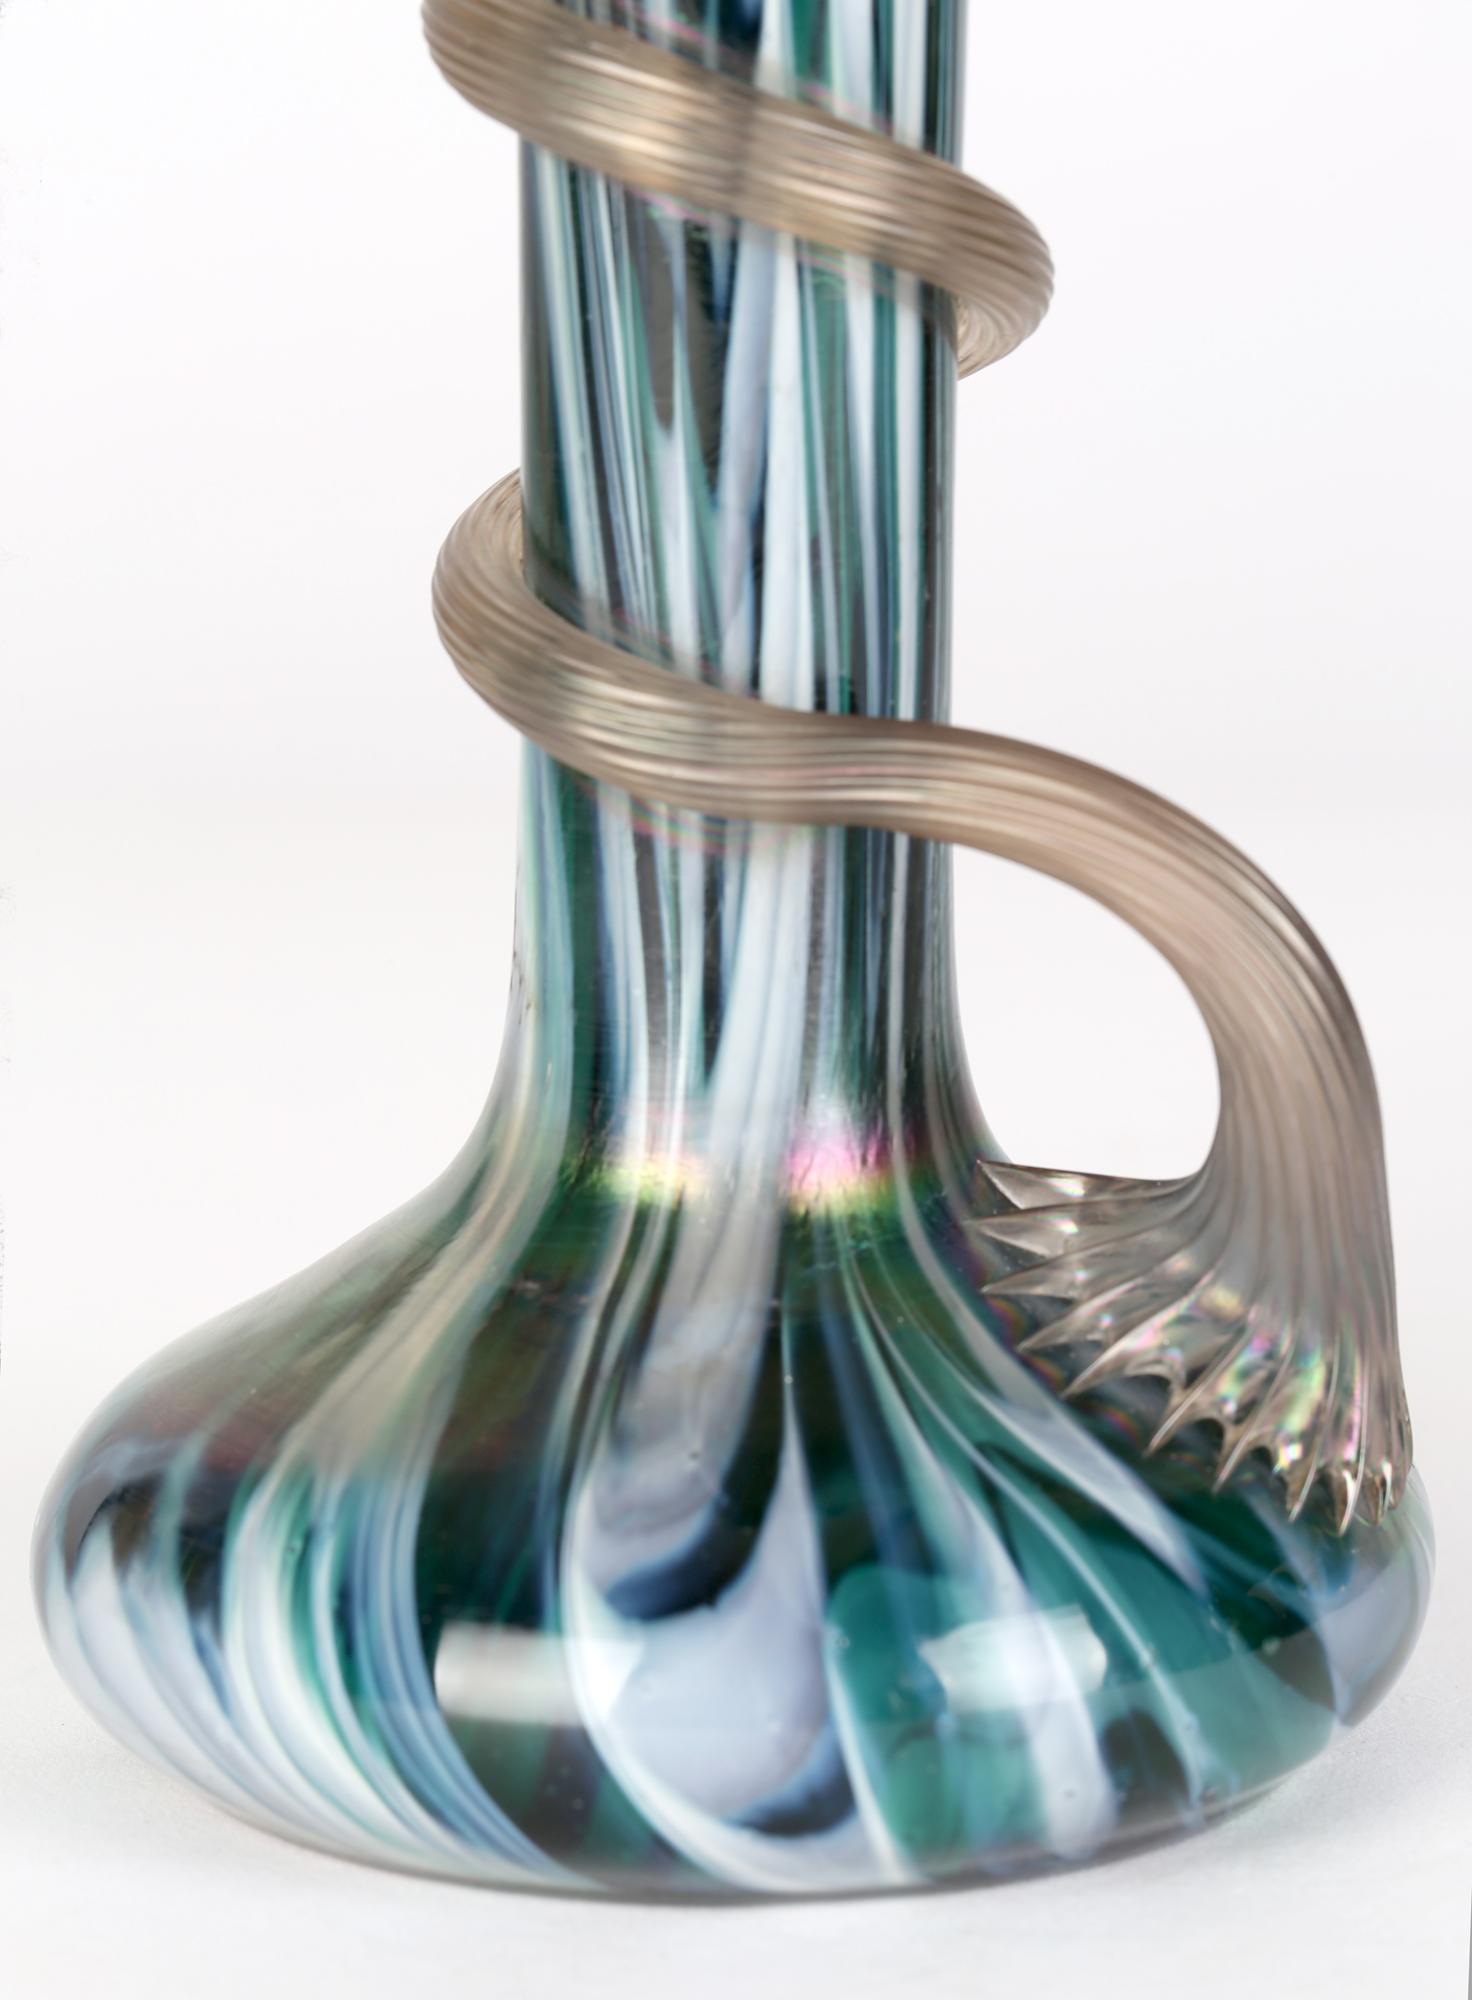 A stunning Bohemain Art Nouveau art glass vase with an iridescent marbled design and silver rim by Josef Rindskopf and dating from around 1904. The vase has a wide rounded lower body with tall slender neck and ball shaped top mounted with a silver